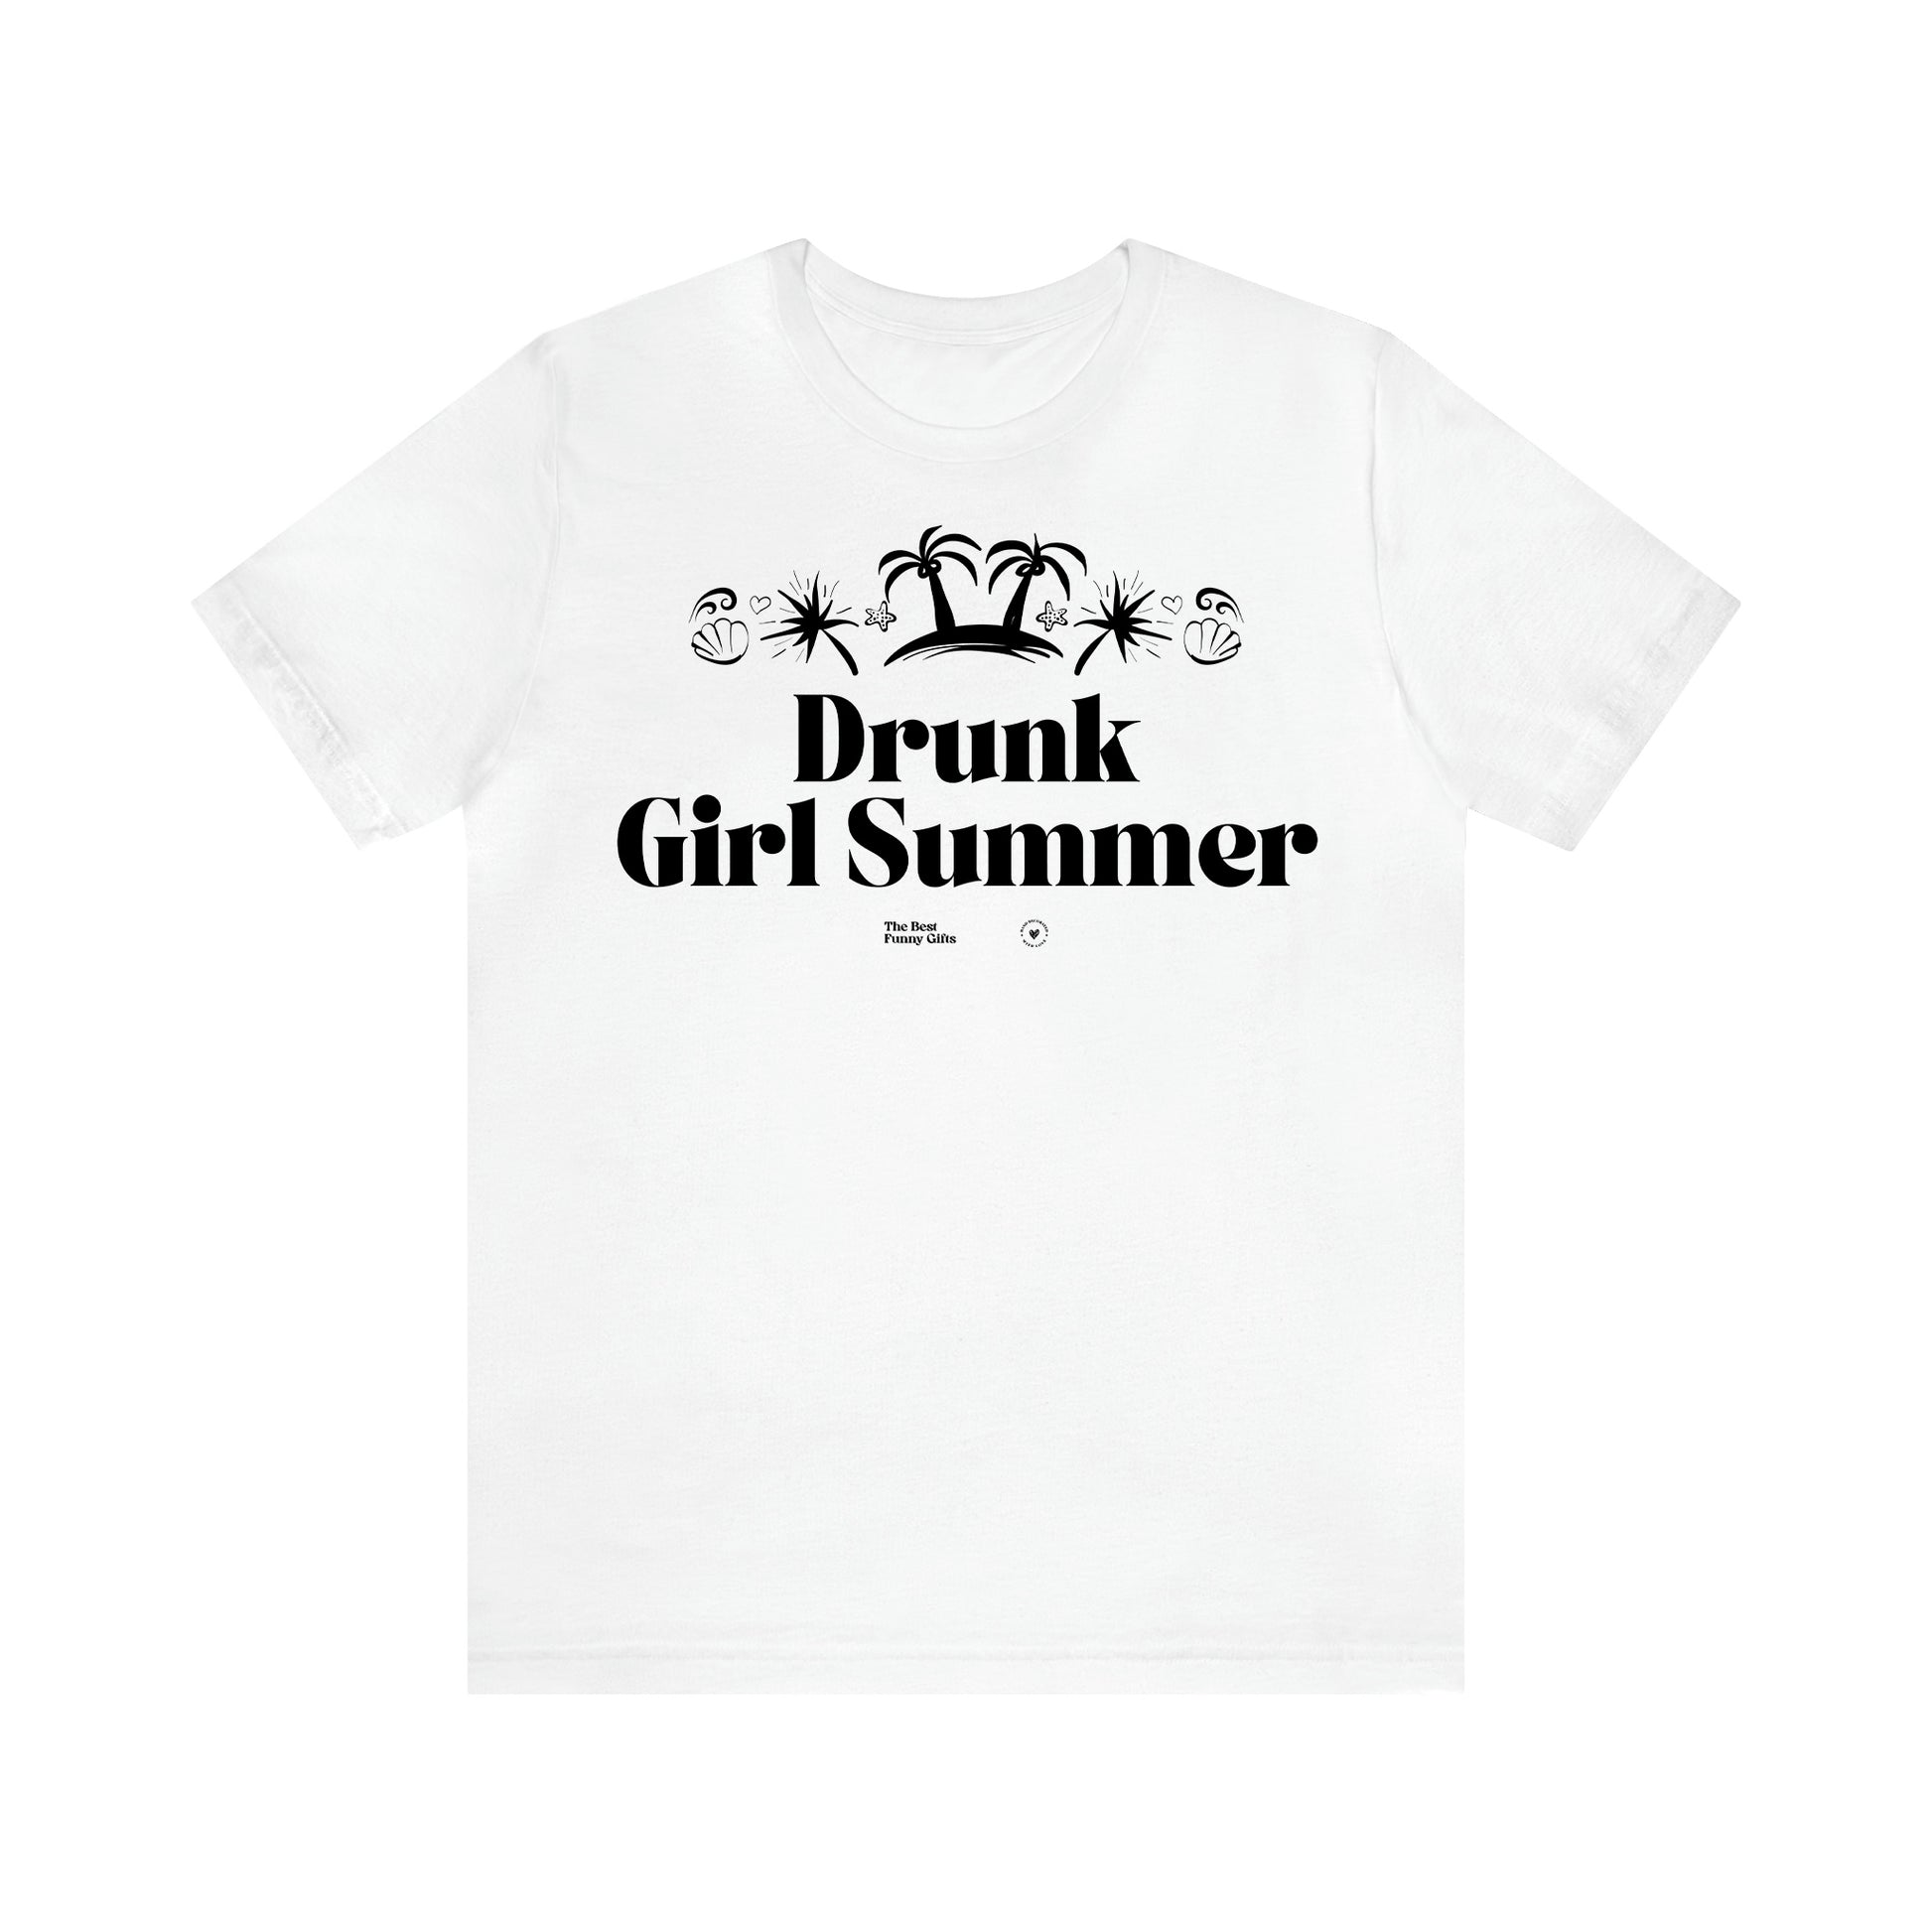 Women's T Shirts Drunk Girl Summer - The Best Funny Gifts